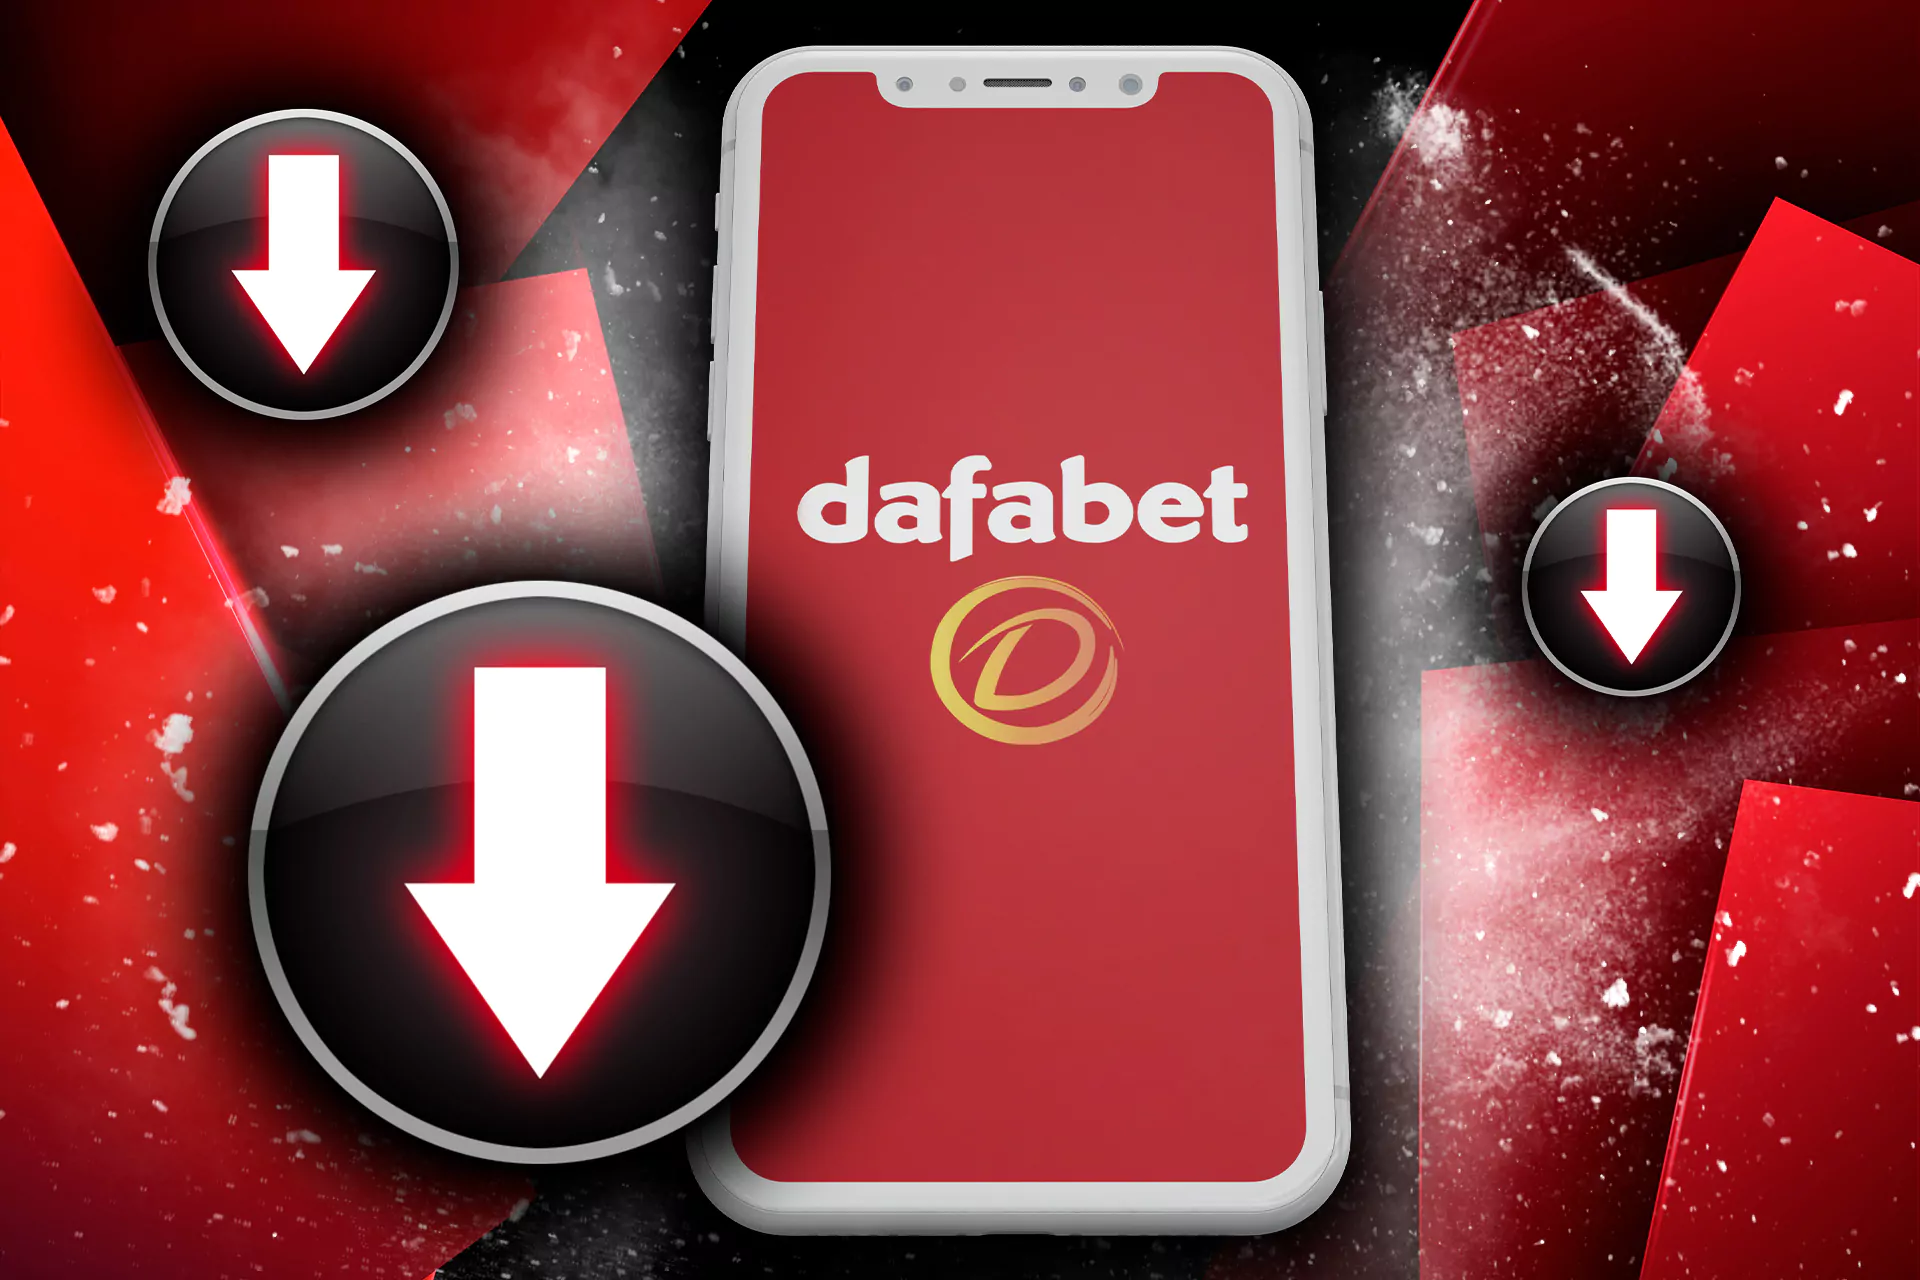 Download the Dafabet app on your iOS device.